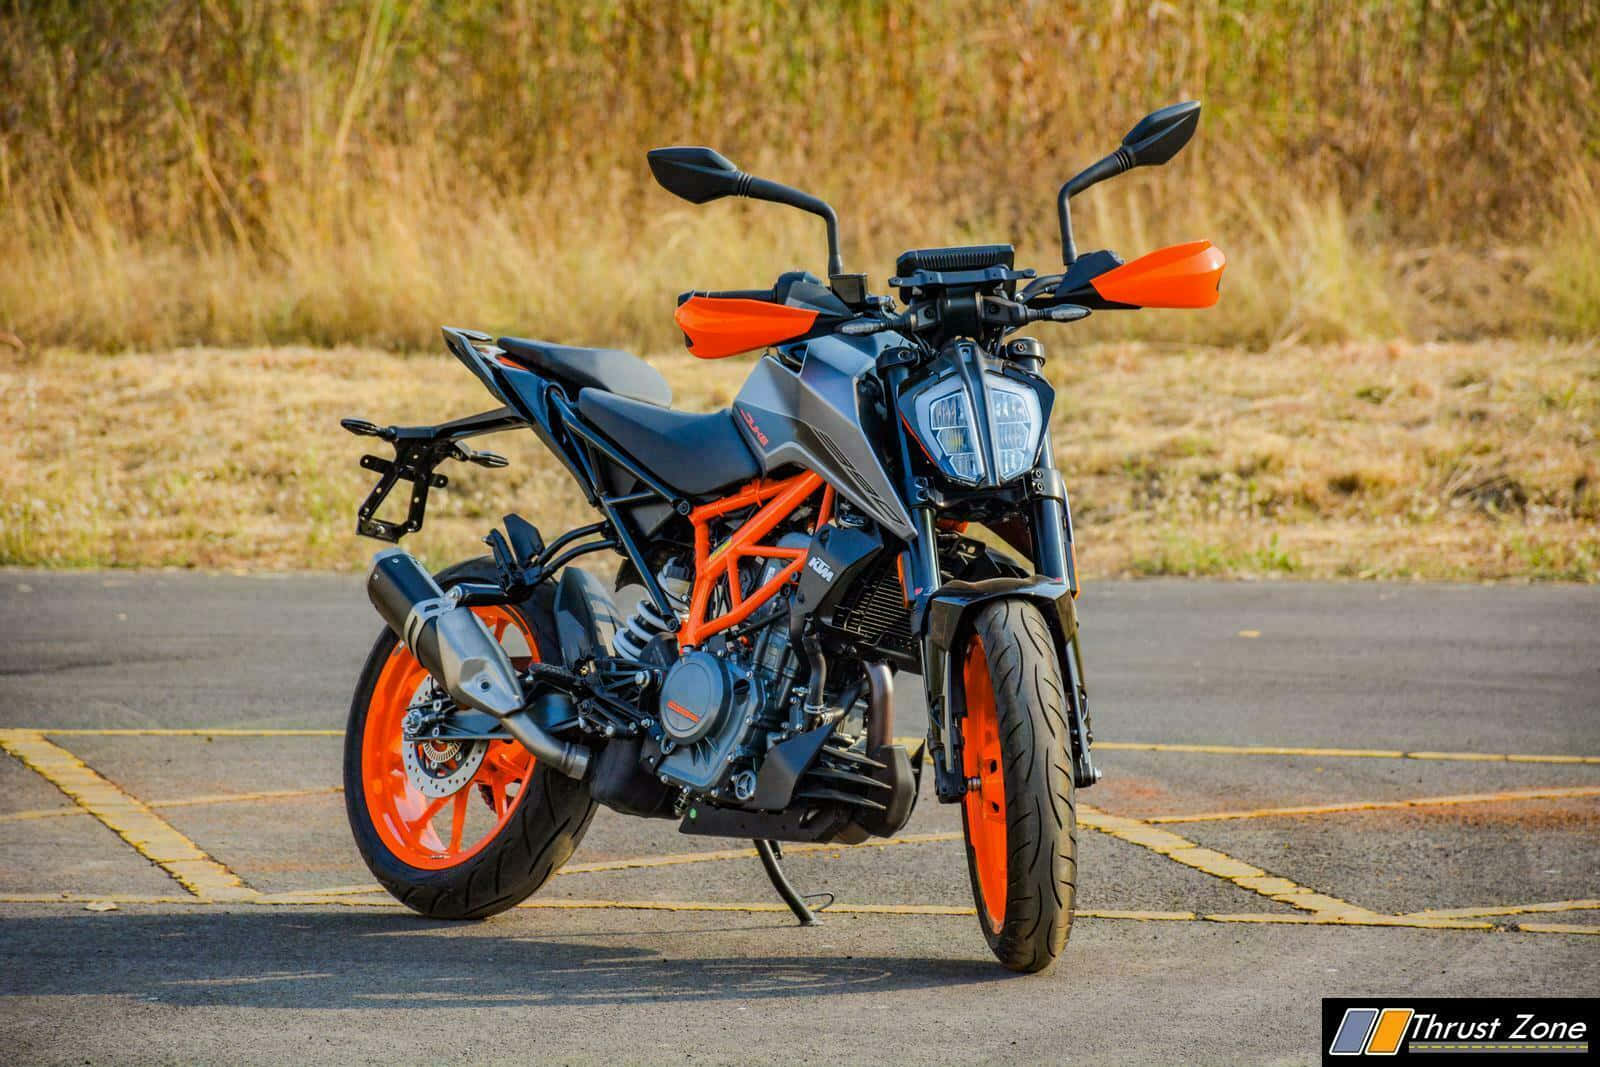 Going for the Extra Mile on the KTM Duke